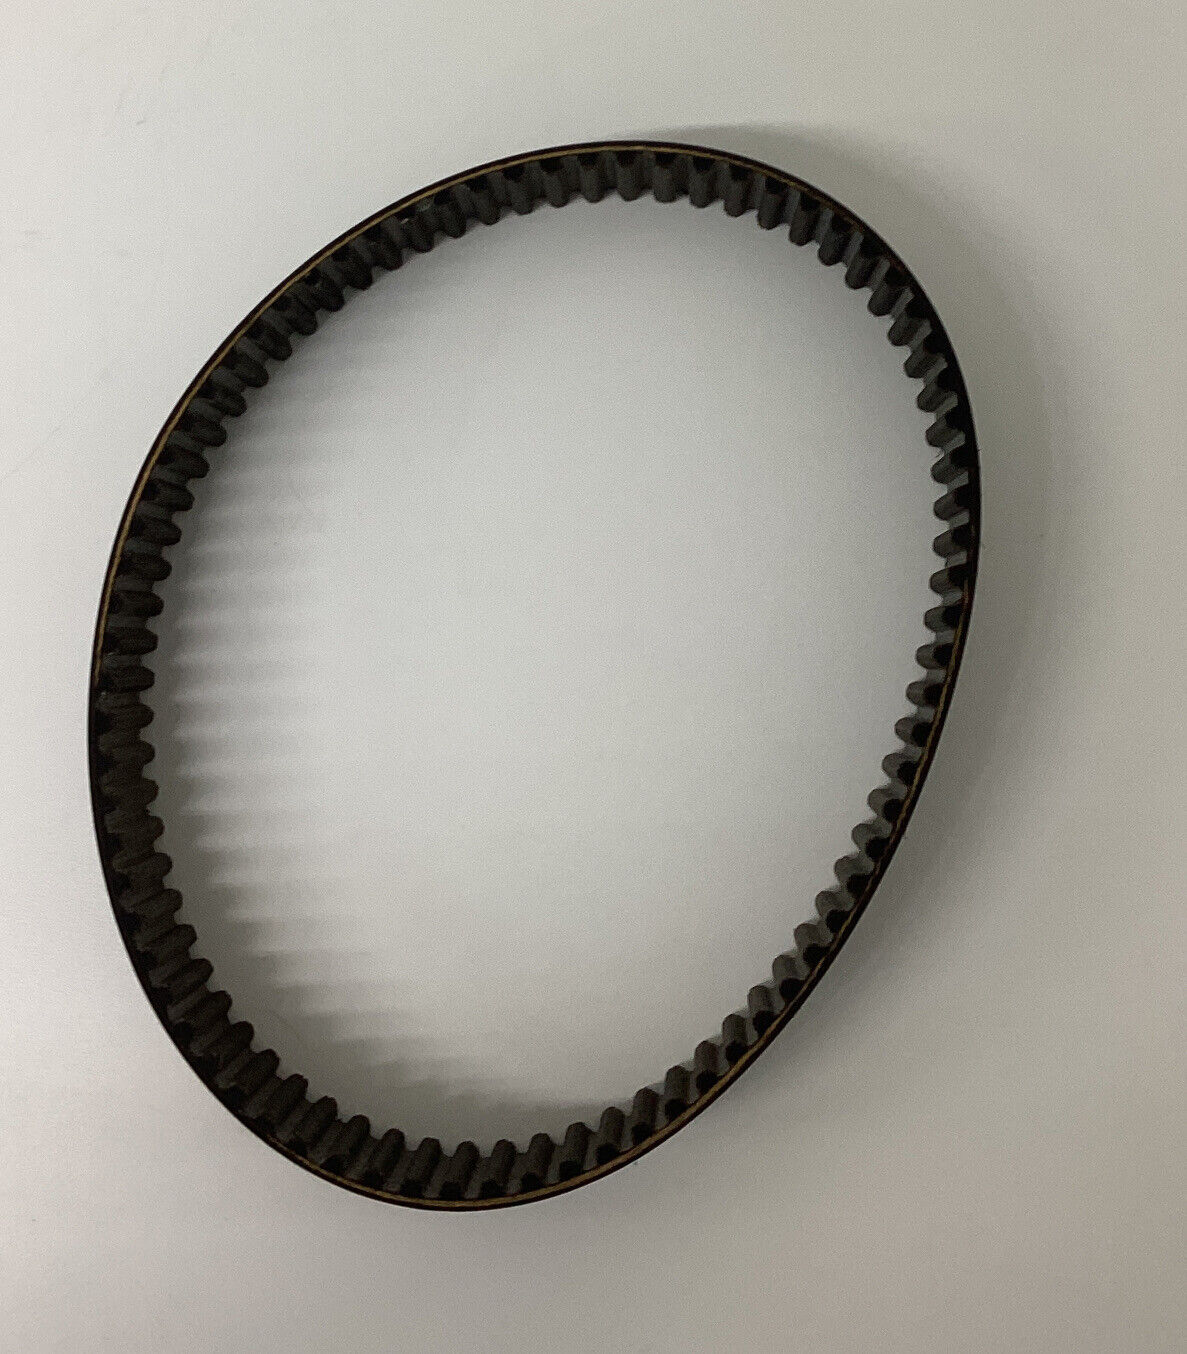 Gates 600-8GMT-30 New PowerGrip GT 4 Transmission / Timing Belt (BE121)